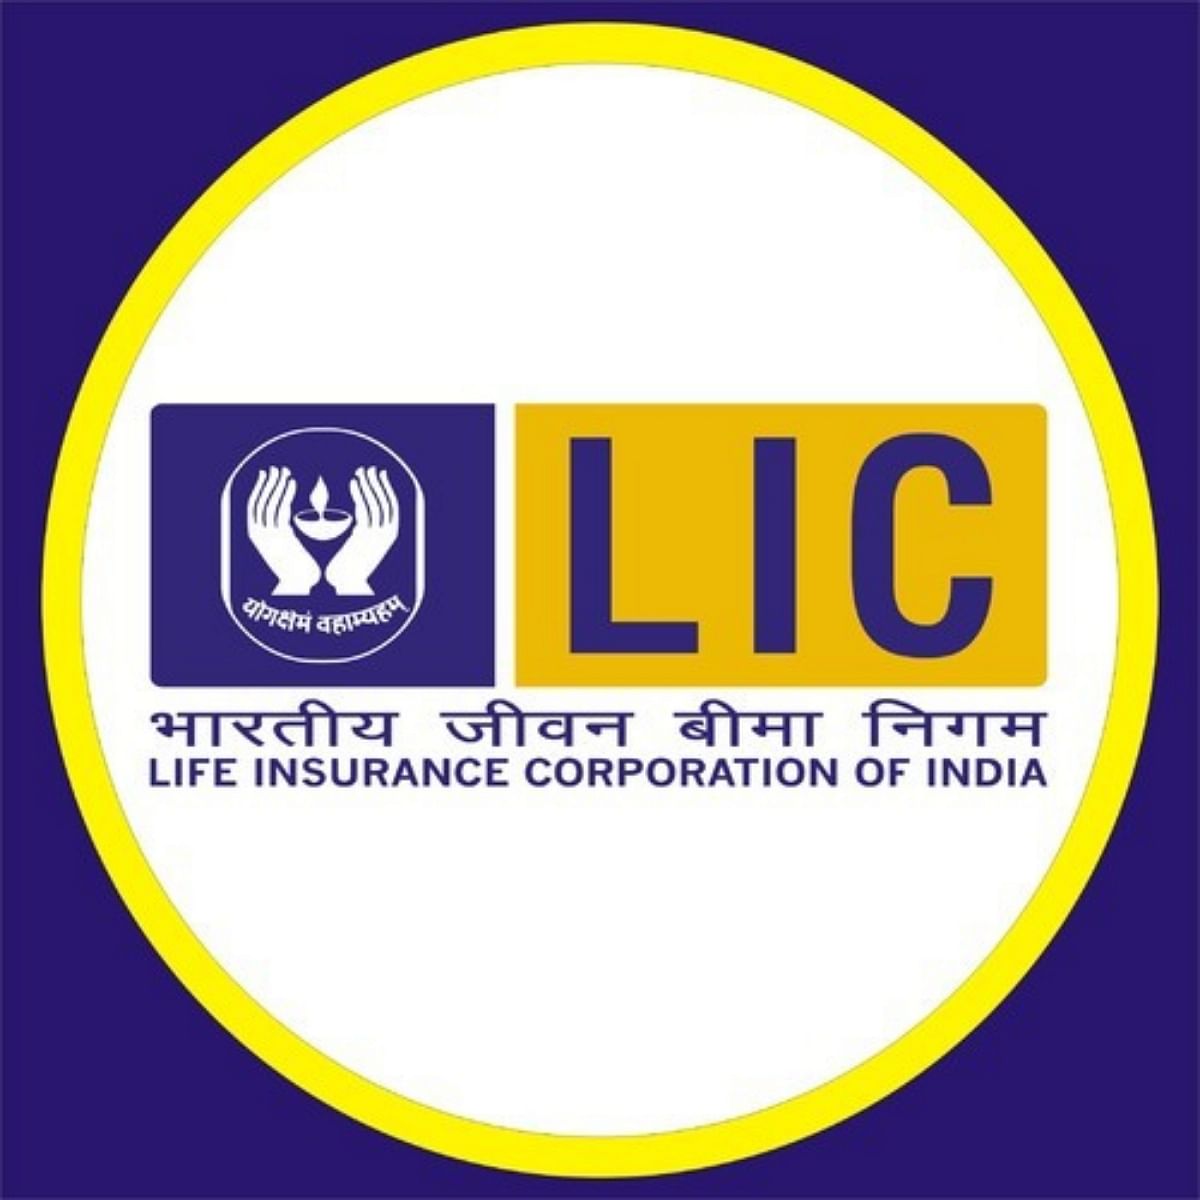 LIC Recruitment 2020: Vacancy for Assistant Engineer post, Exam to be Conducted in April